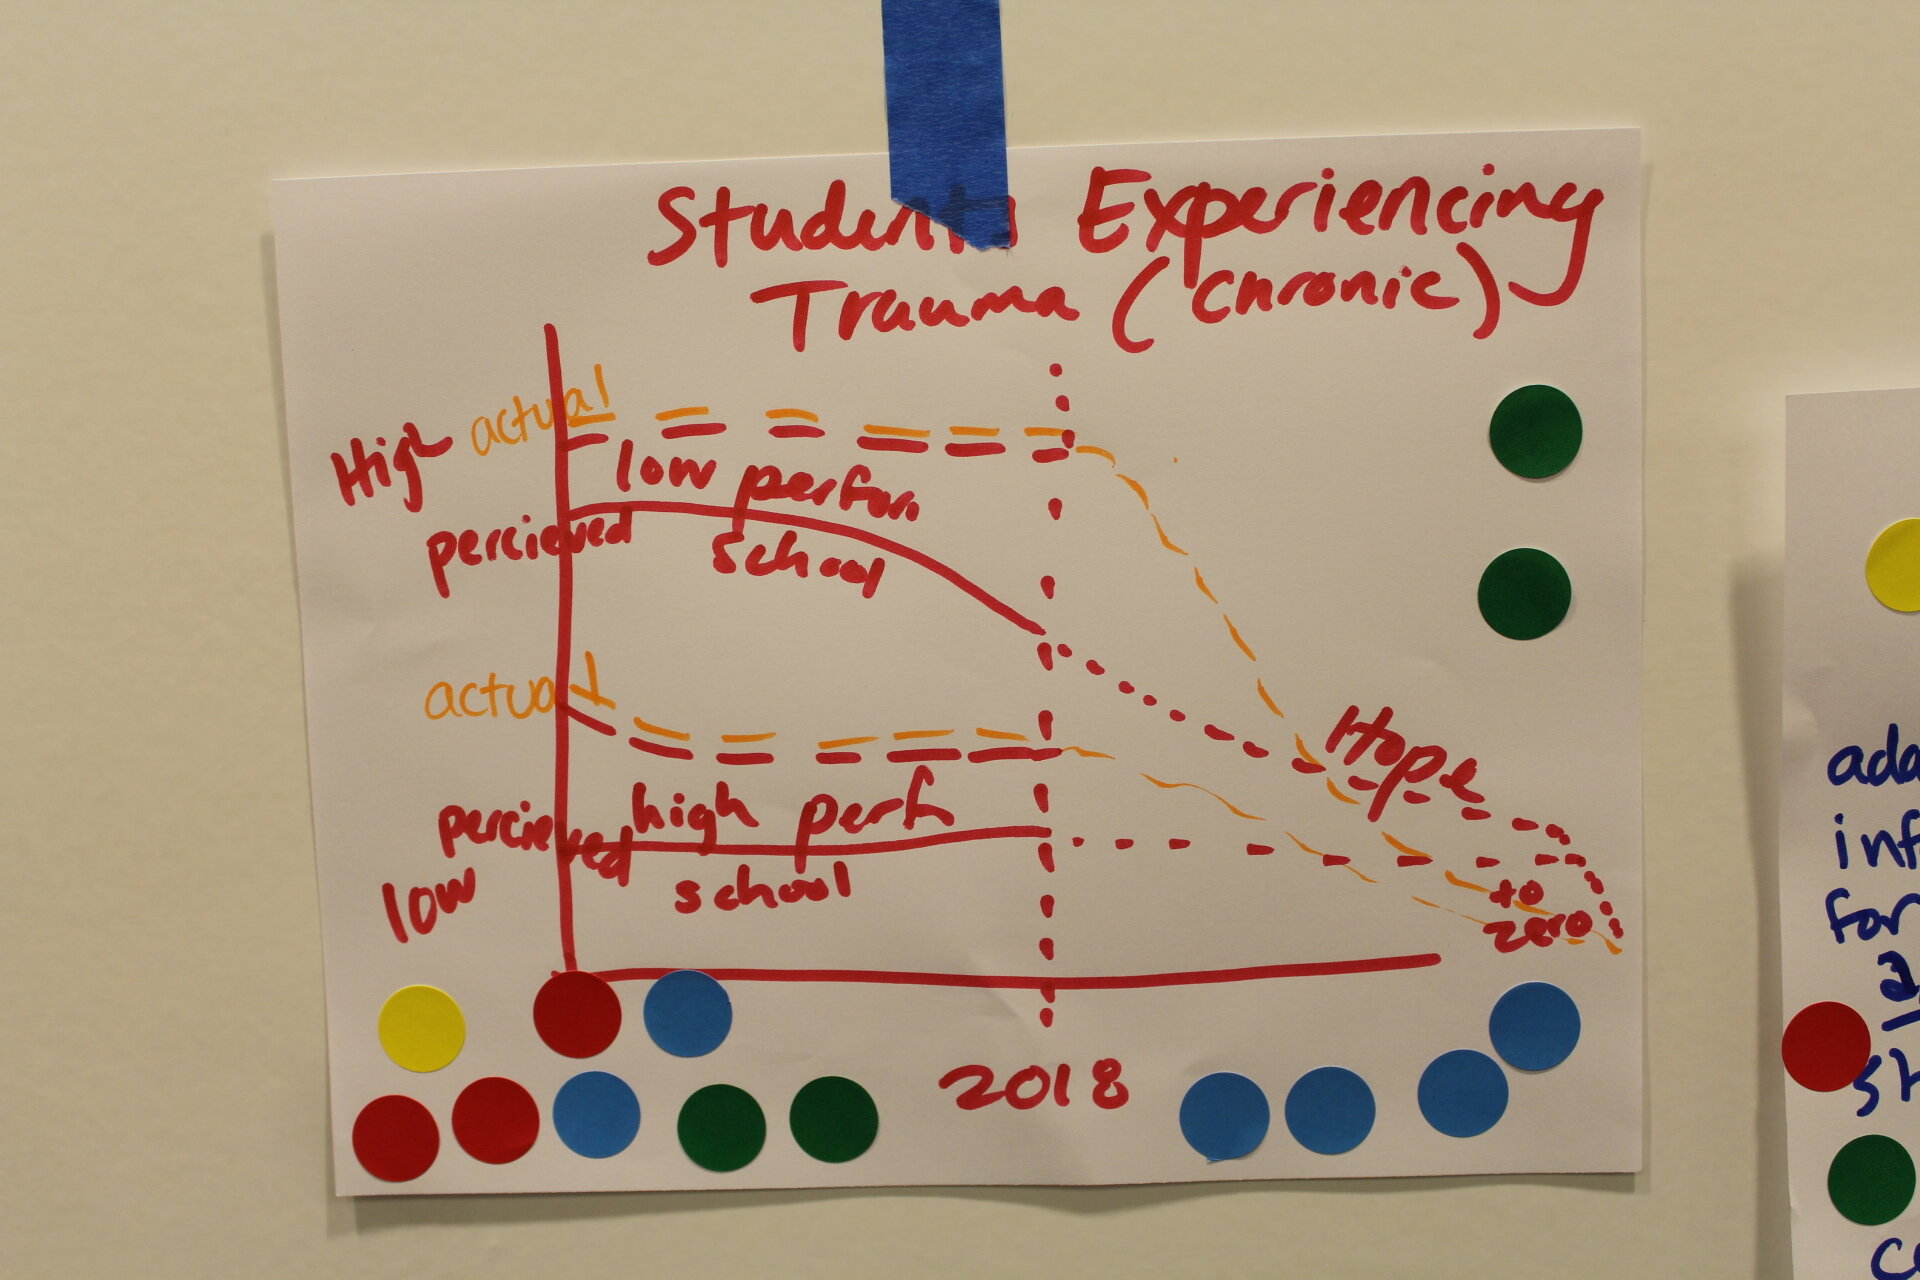 A behavior over time graph showing students experiencing trauma over time.